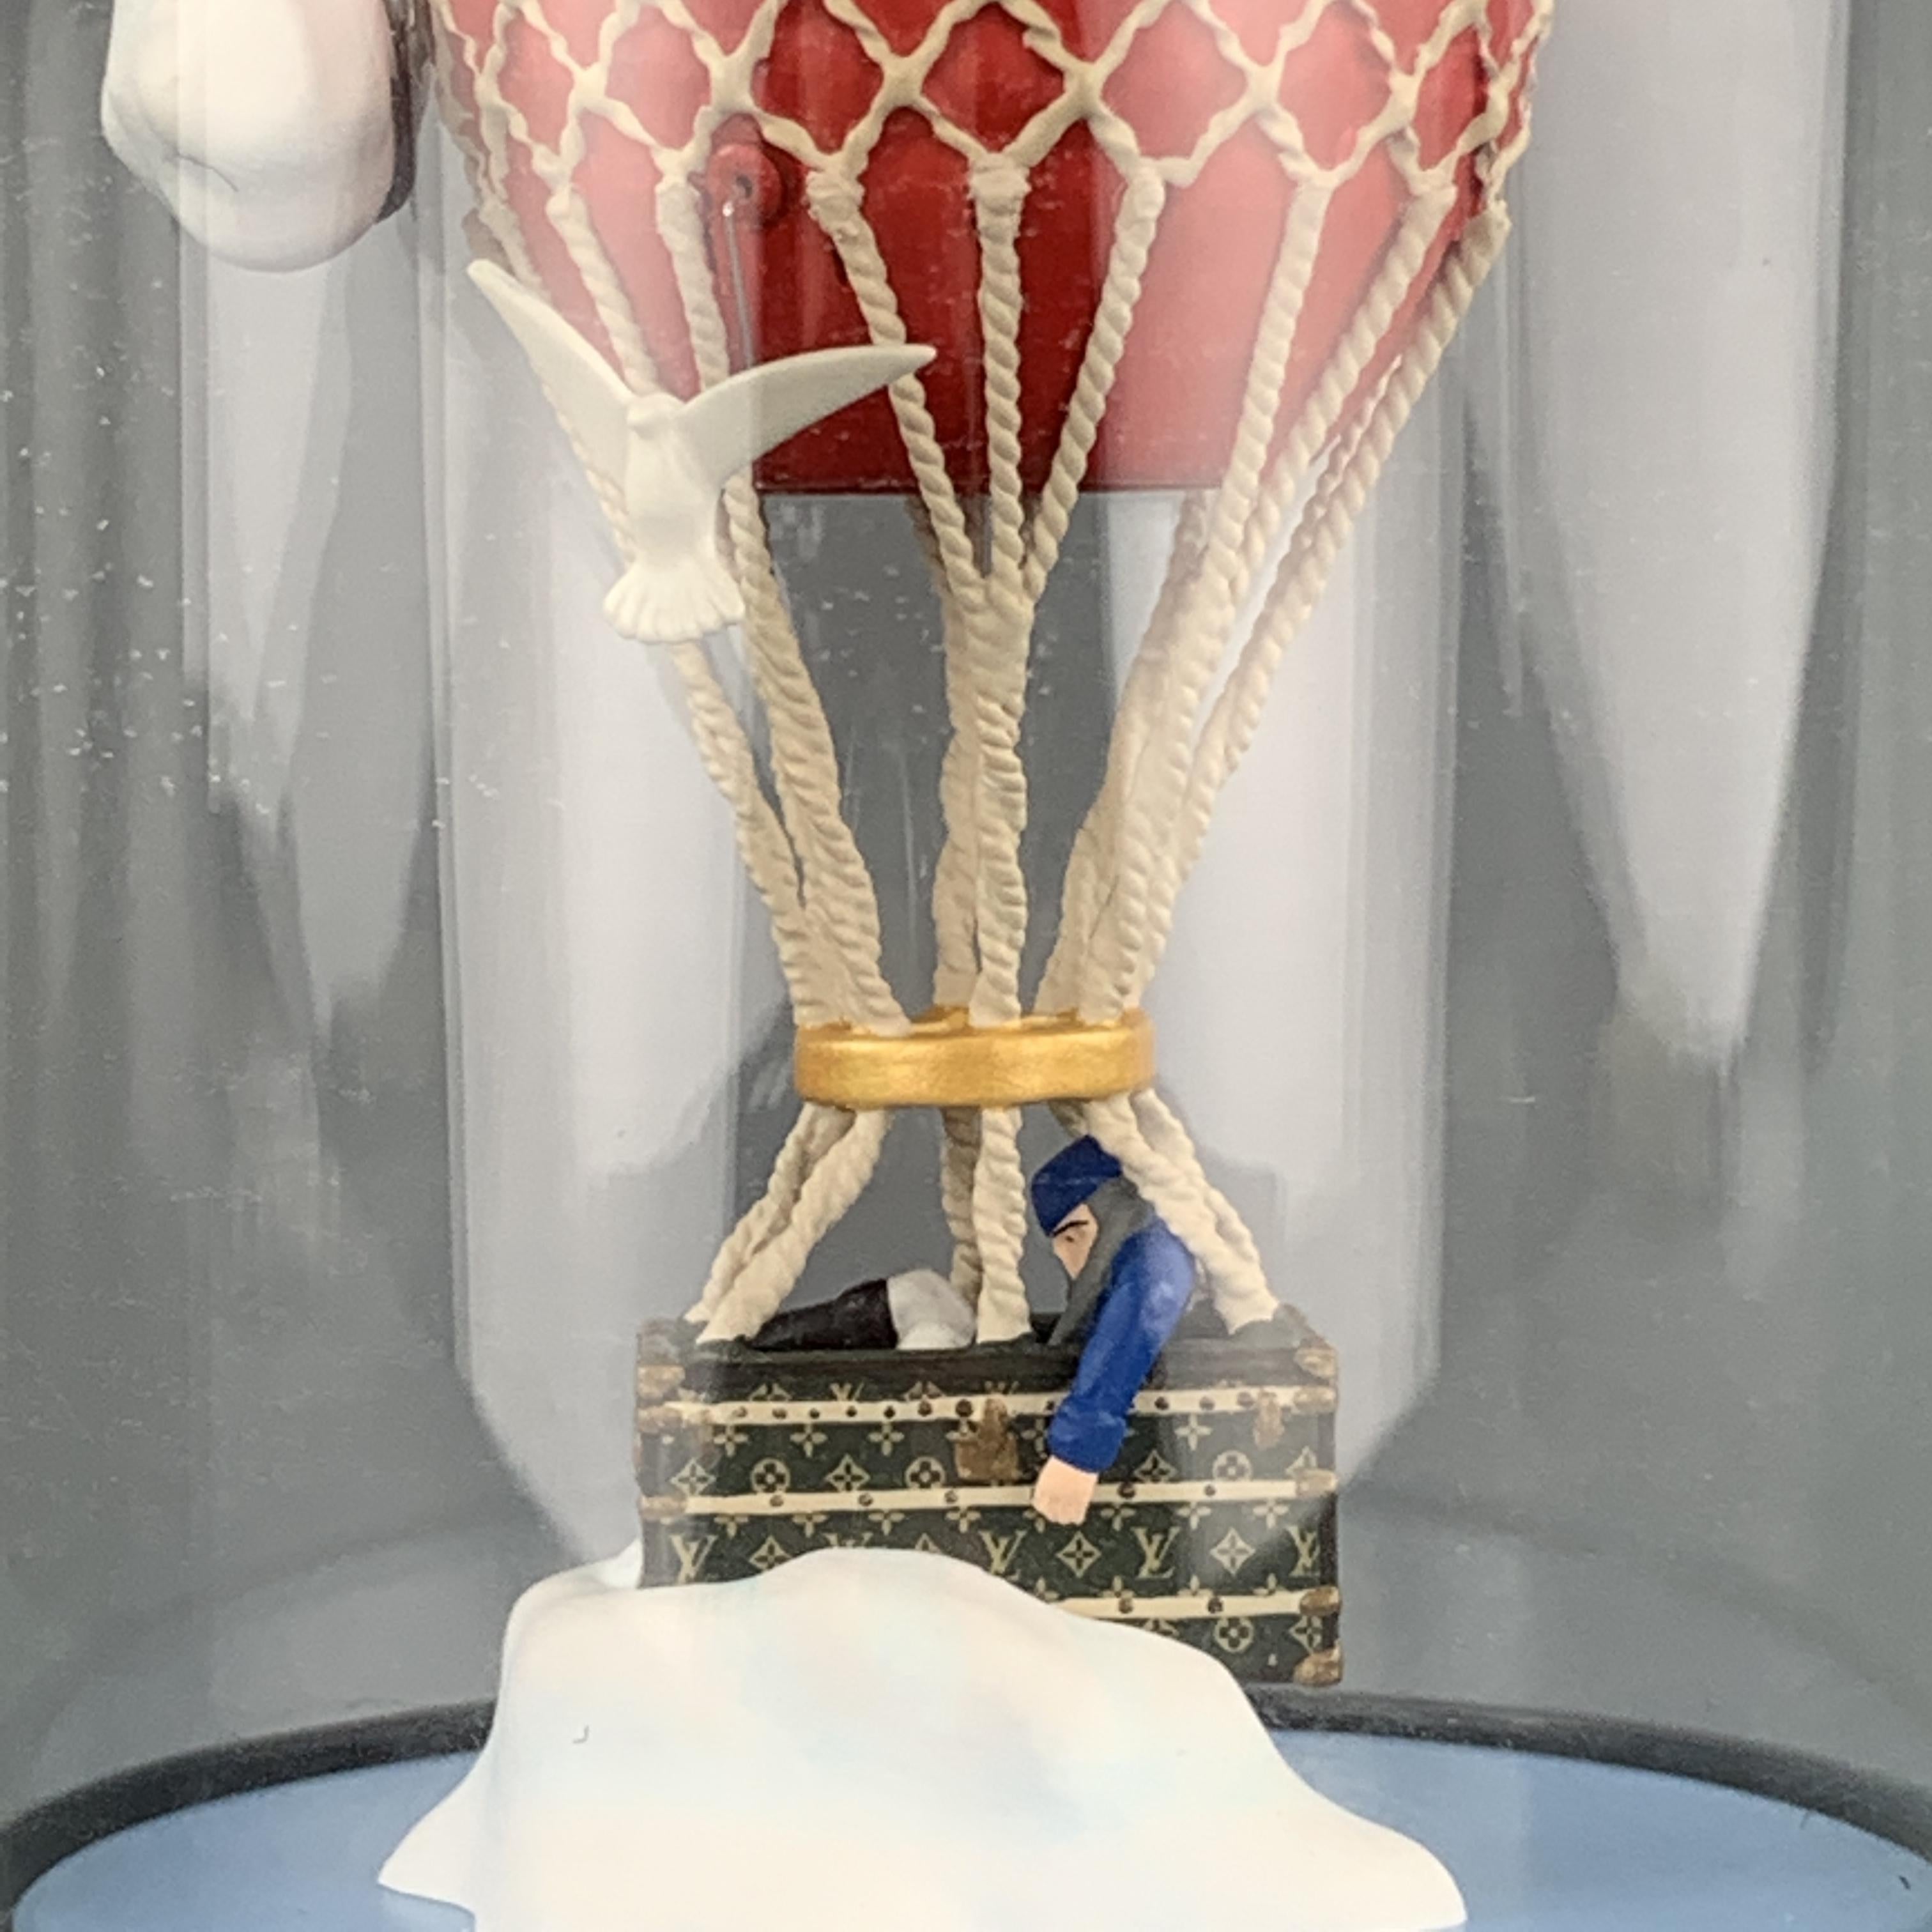 LOUIS VUITTON snow globe features a figurine of a man in a monogram trunk hot air balloon with cloud and birds in a glass dome with black logo base. Minor aging through glass. With original box.

Very Good Pre-Owned Condition.

Width: 8 cm.
Height: